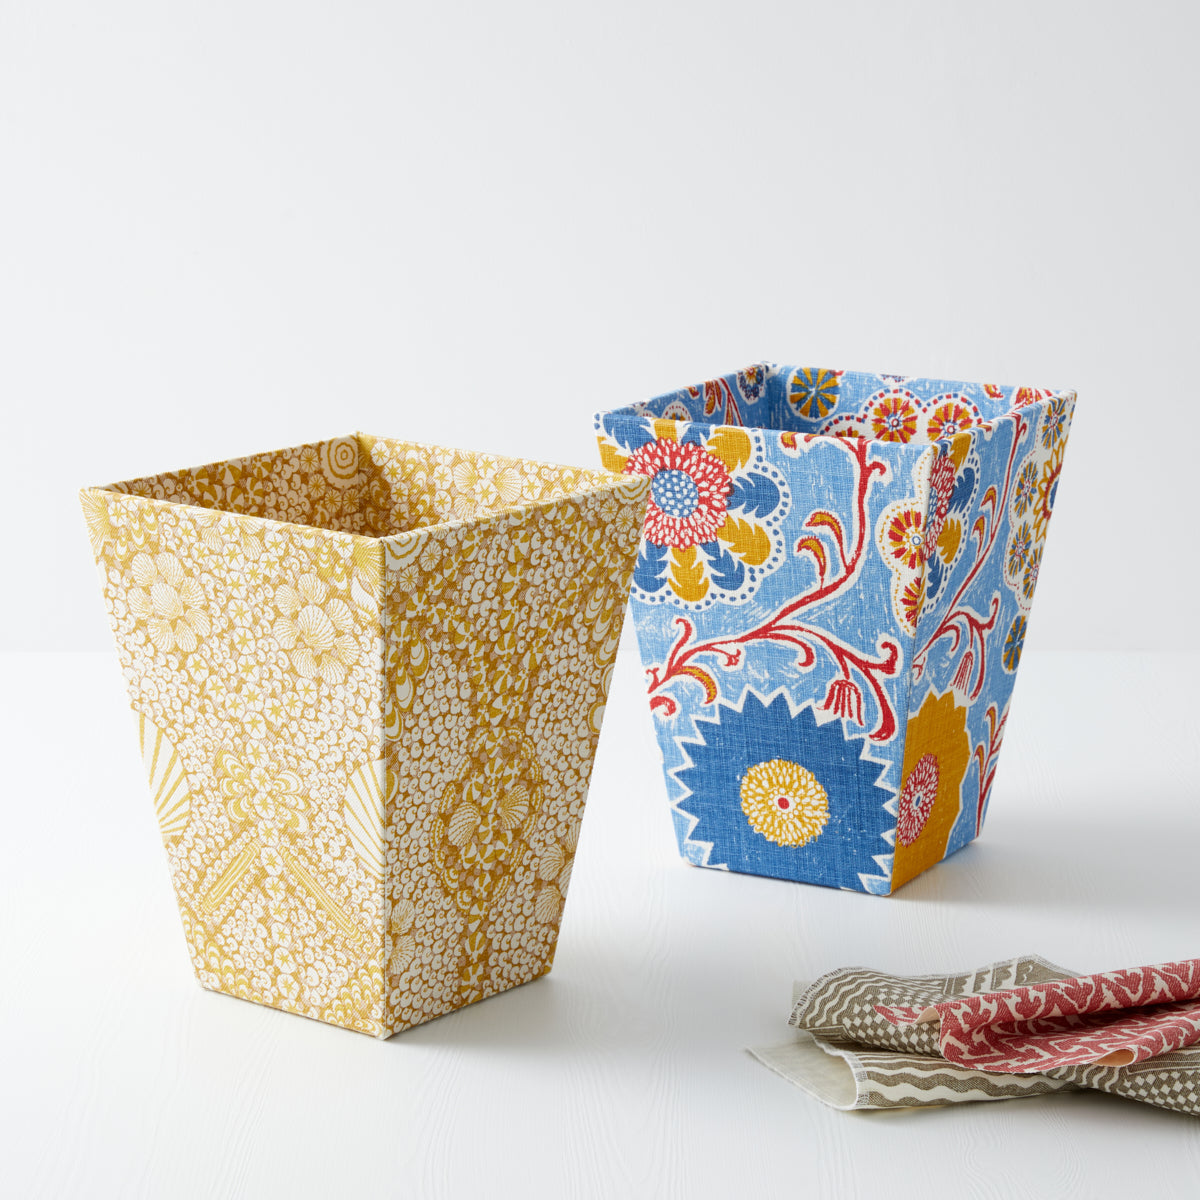 Send Your Own Fabric Waste Paper Bins